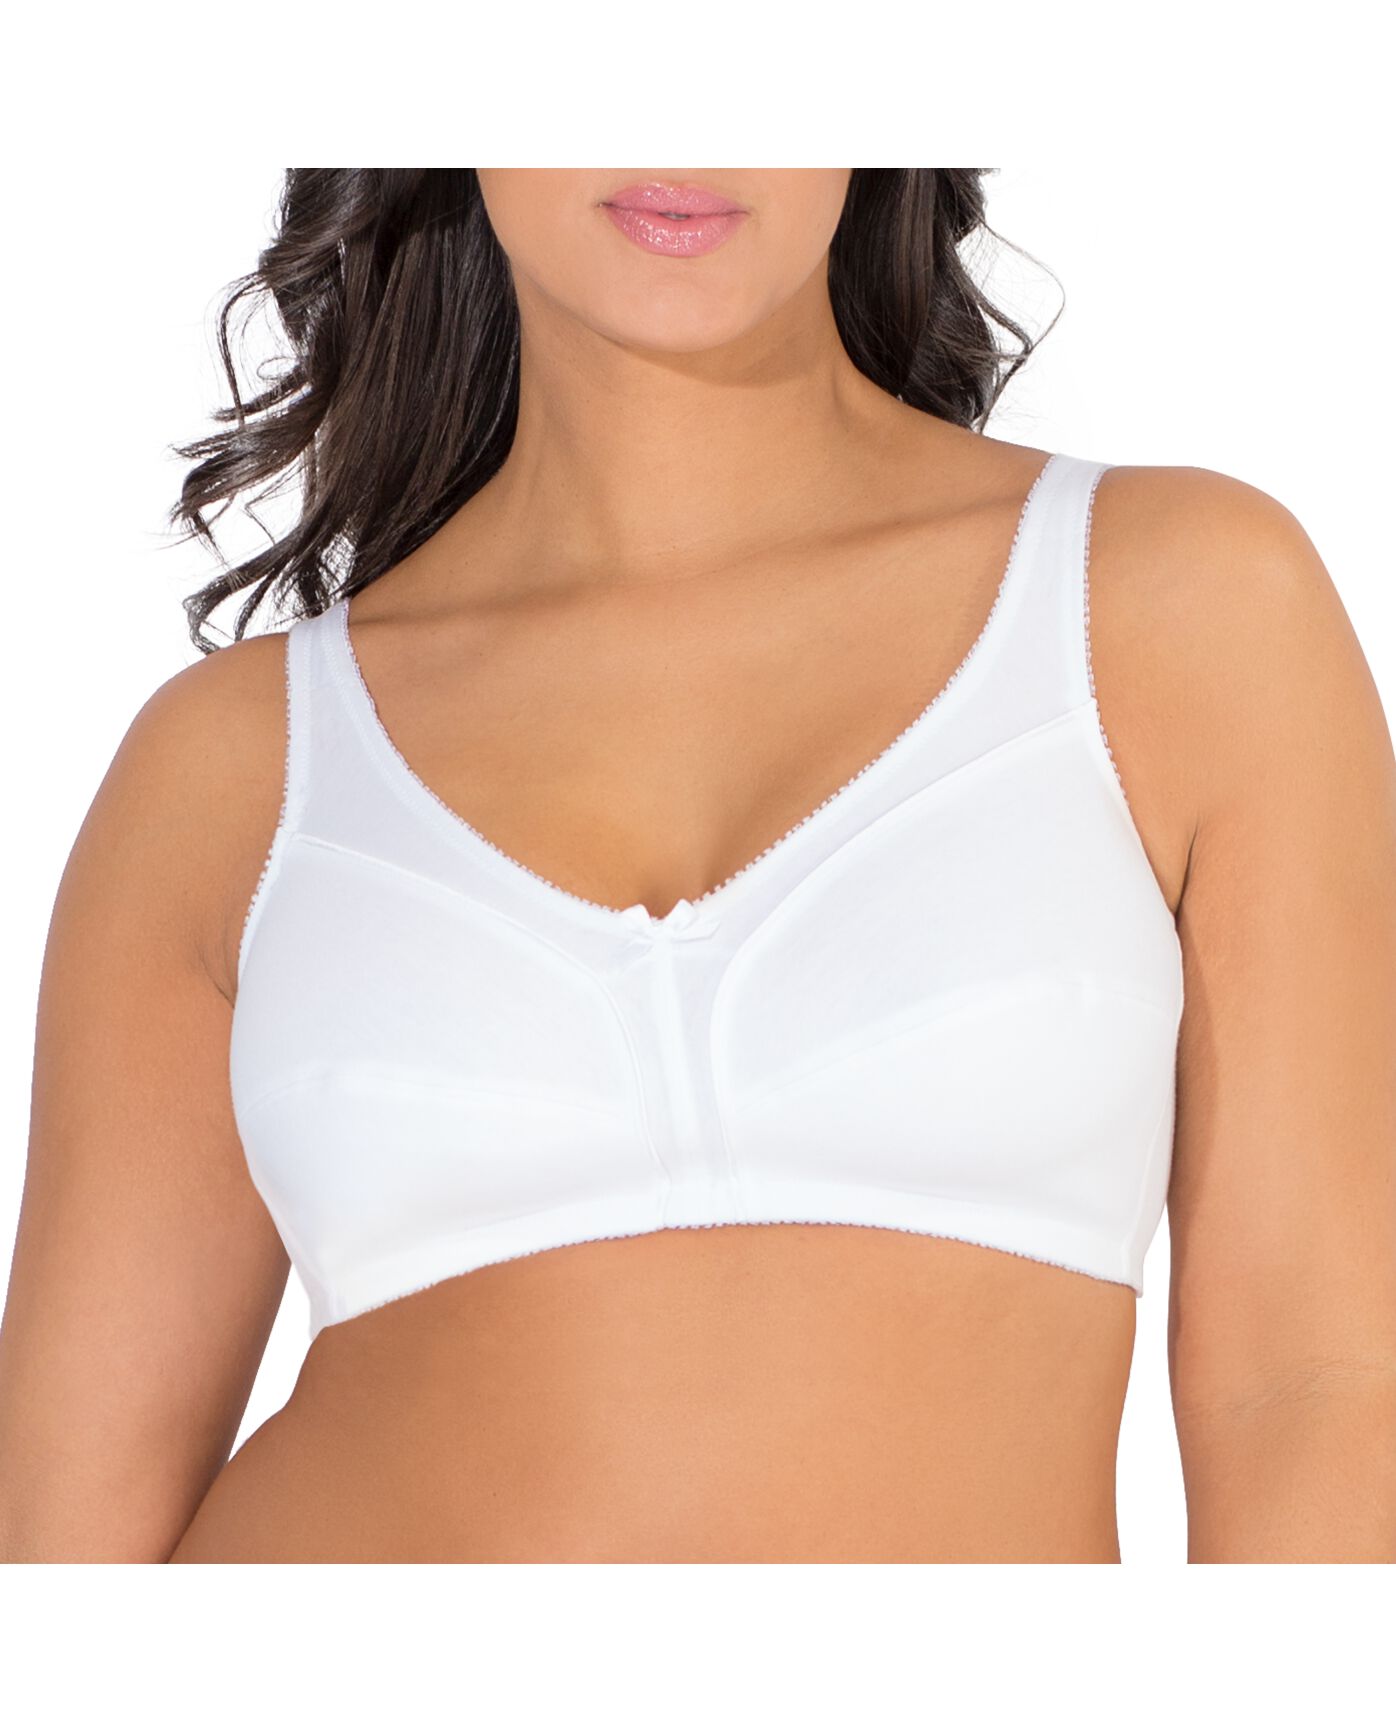 Fruit of the Loom Wire-free Cotton Bralette Best fit for All Women